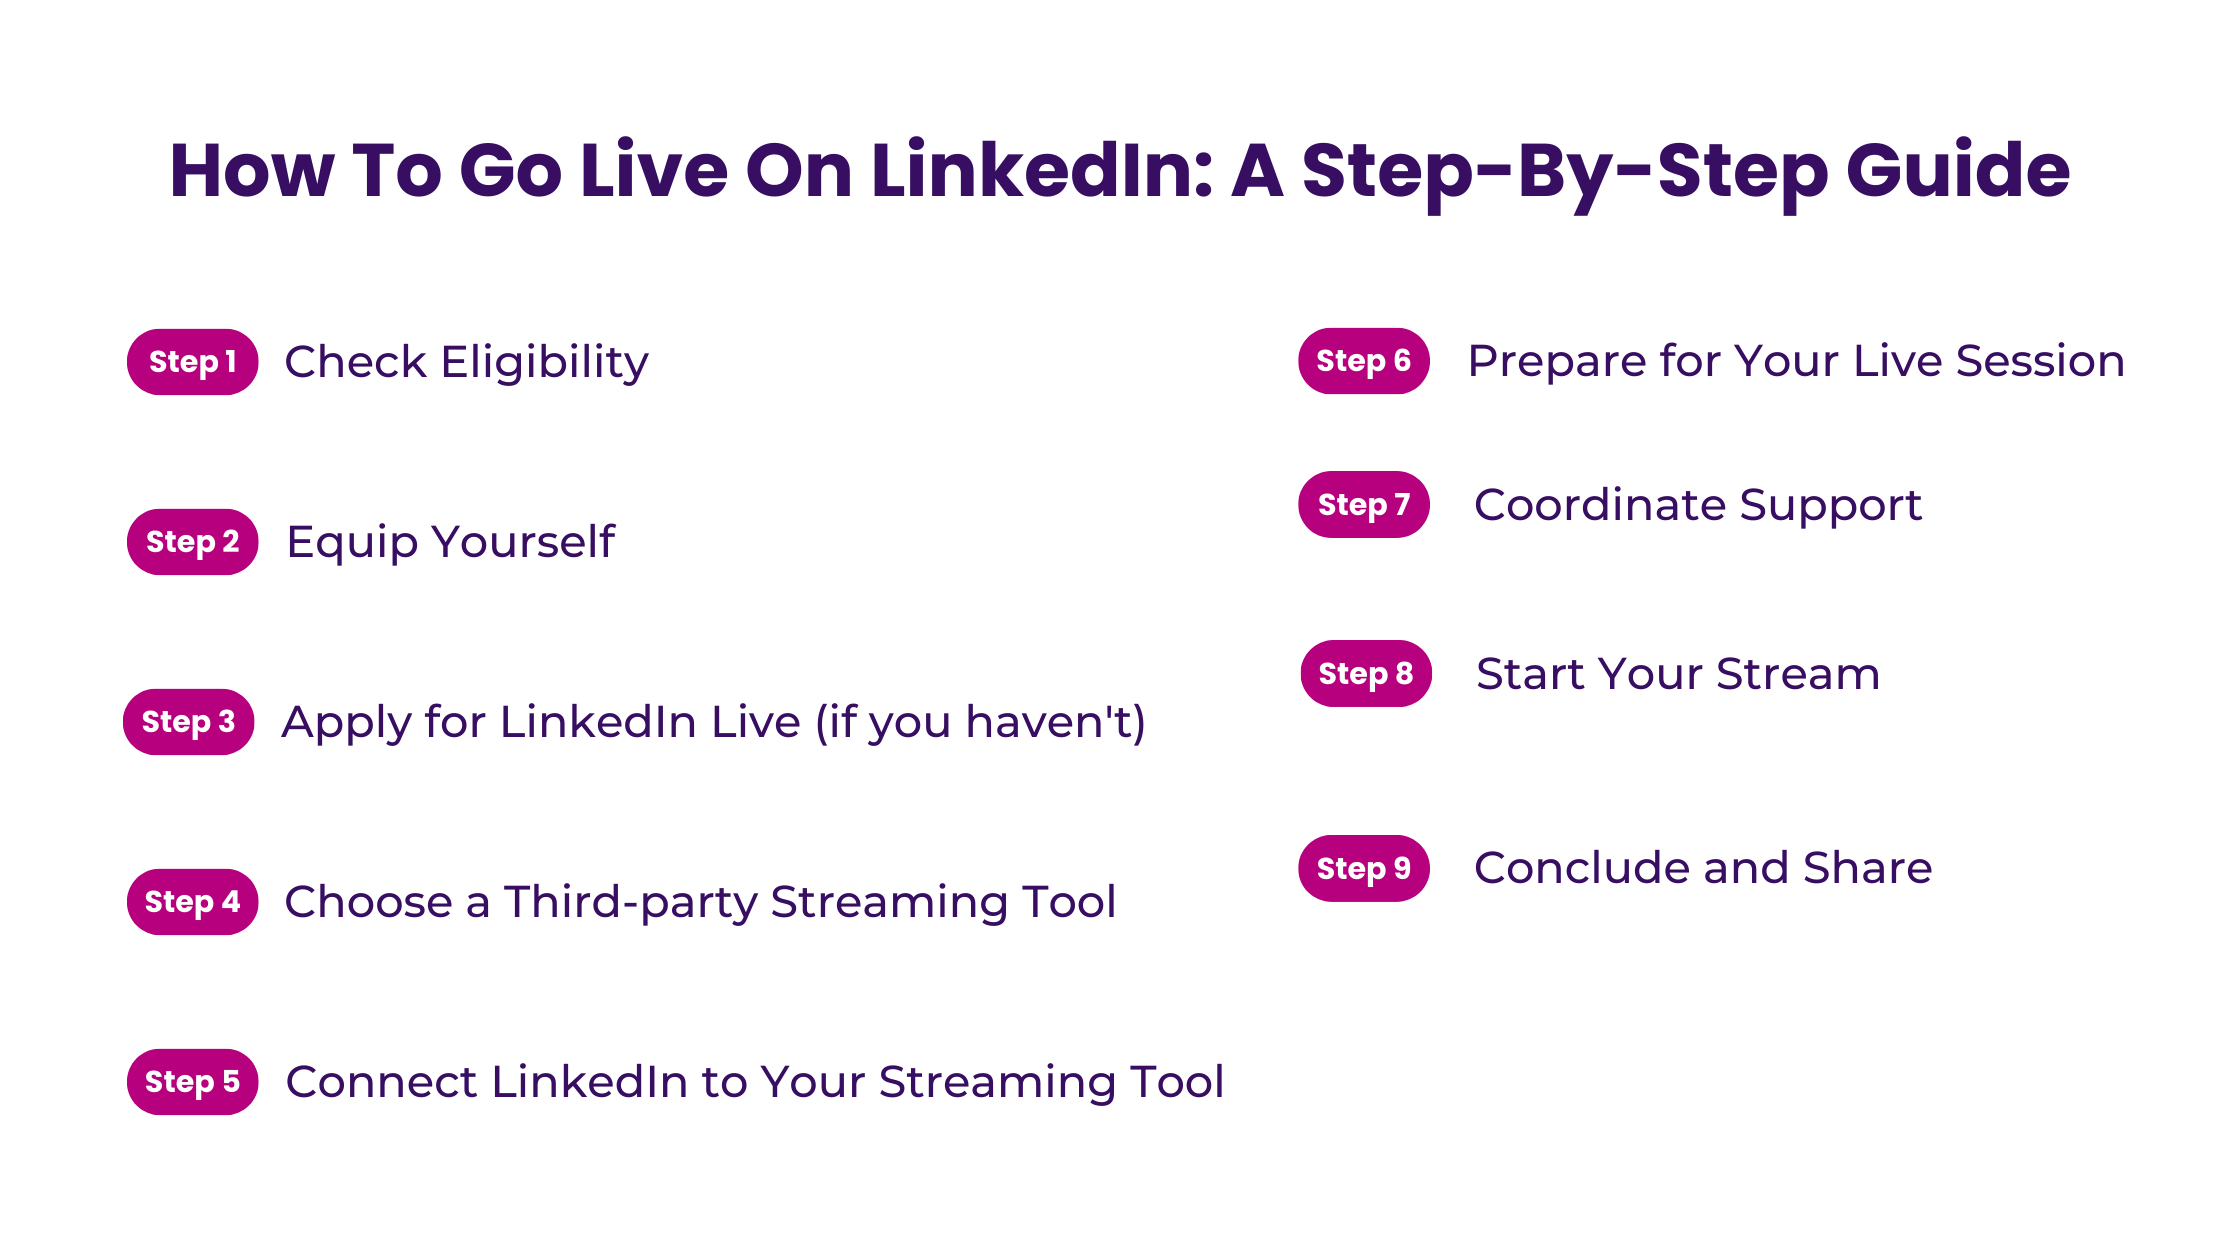 How To Go Live On LinkedIn_ A Step-By-Step Guide